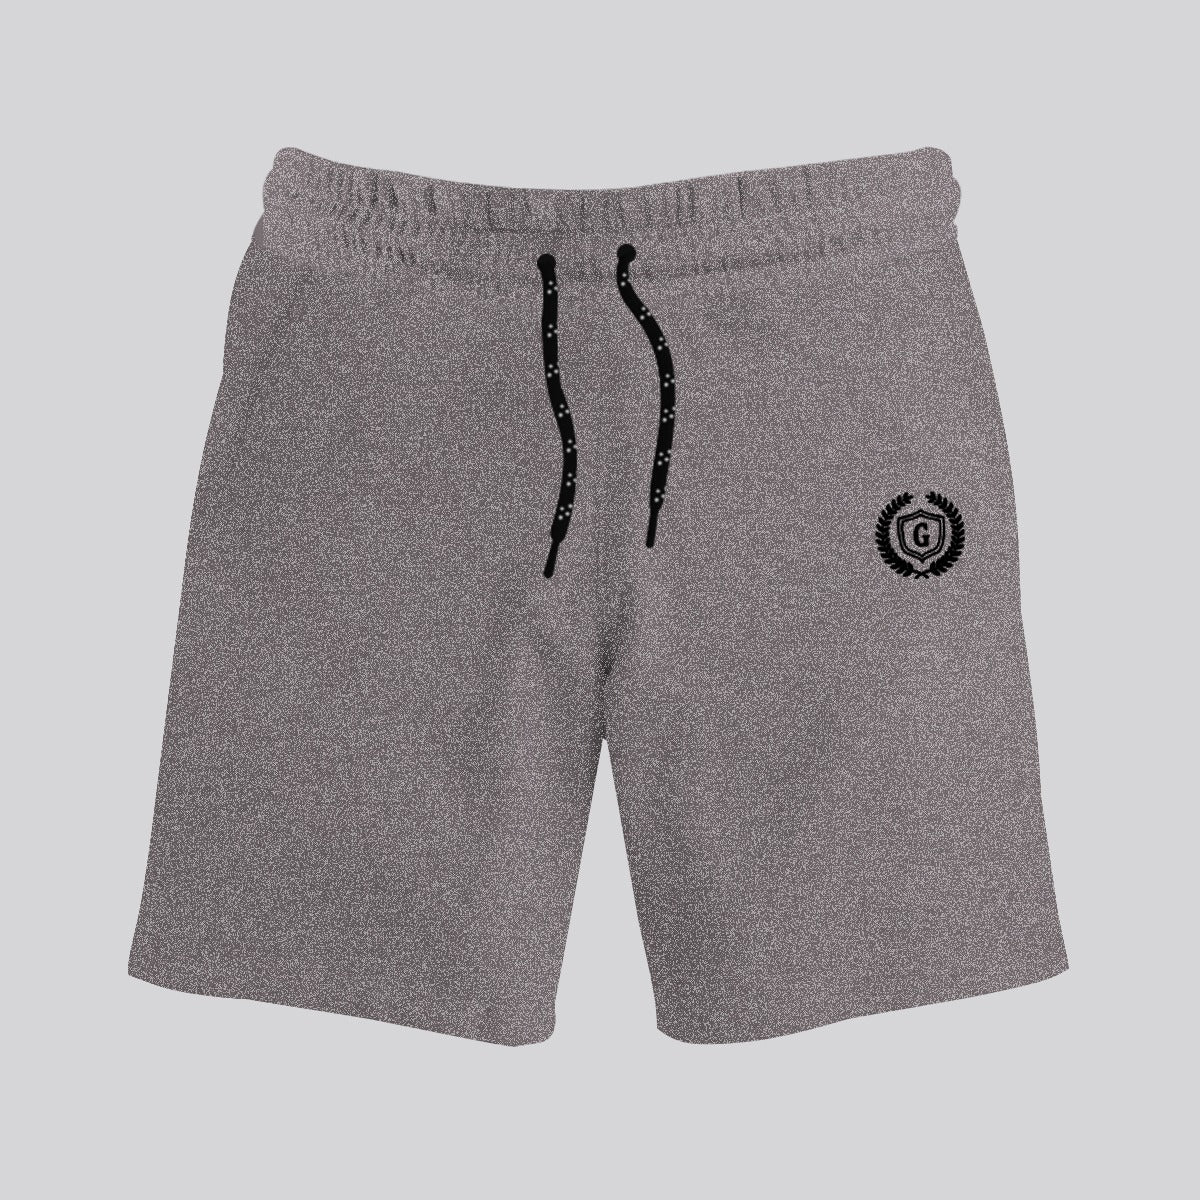 HG Signature Emb Two Quarter Shorts | Textured Pattern | Purple Brown